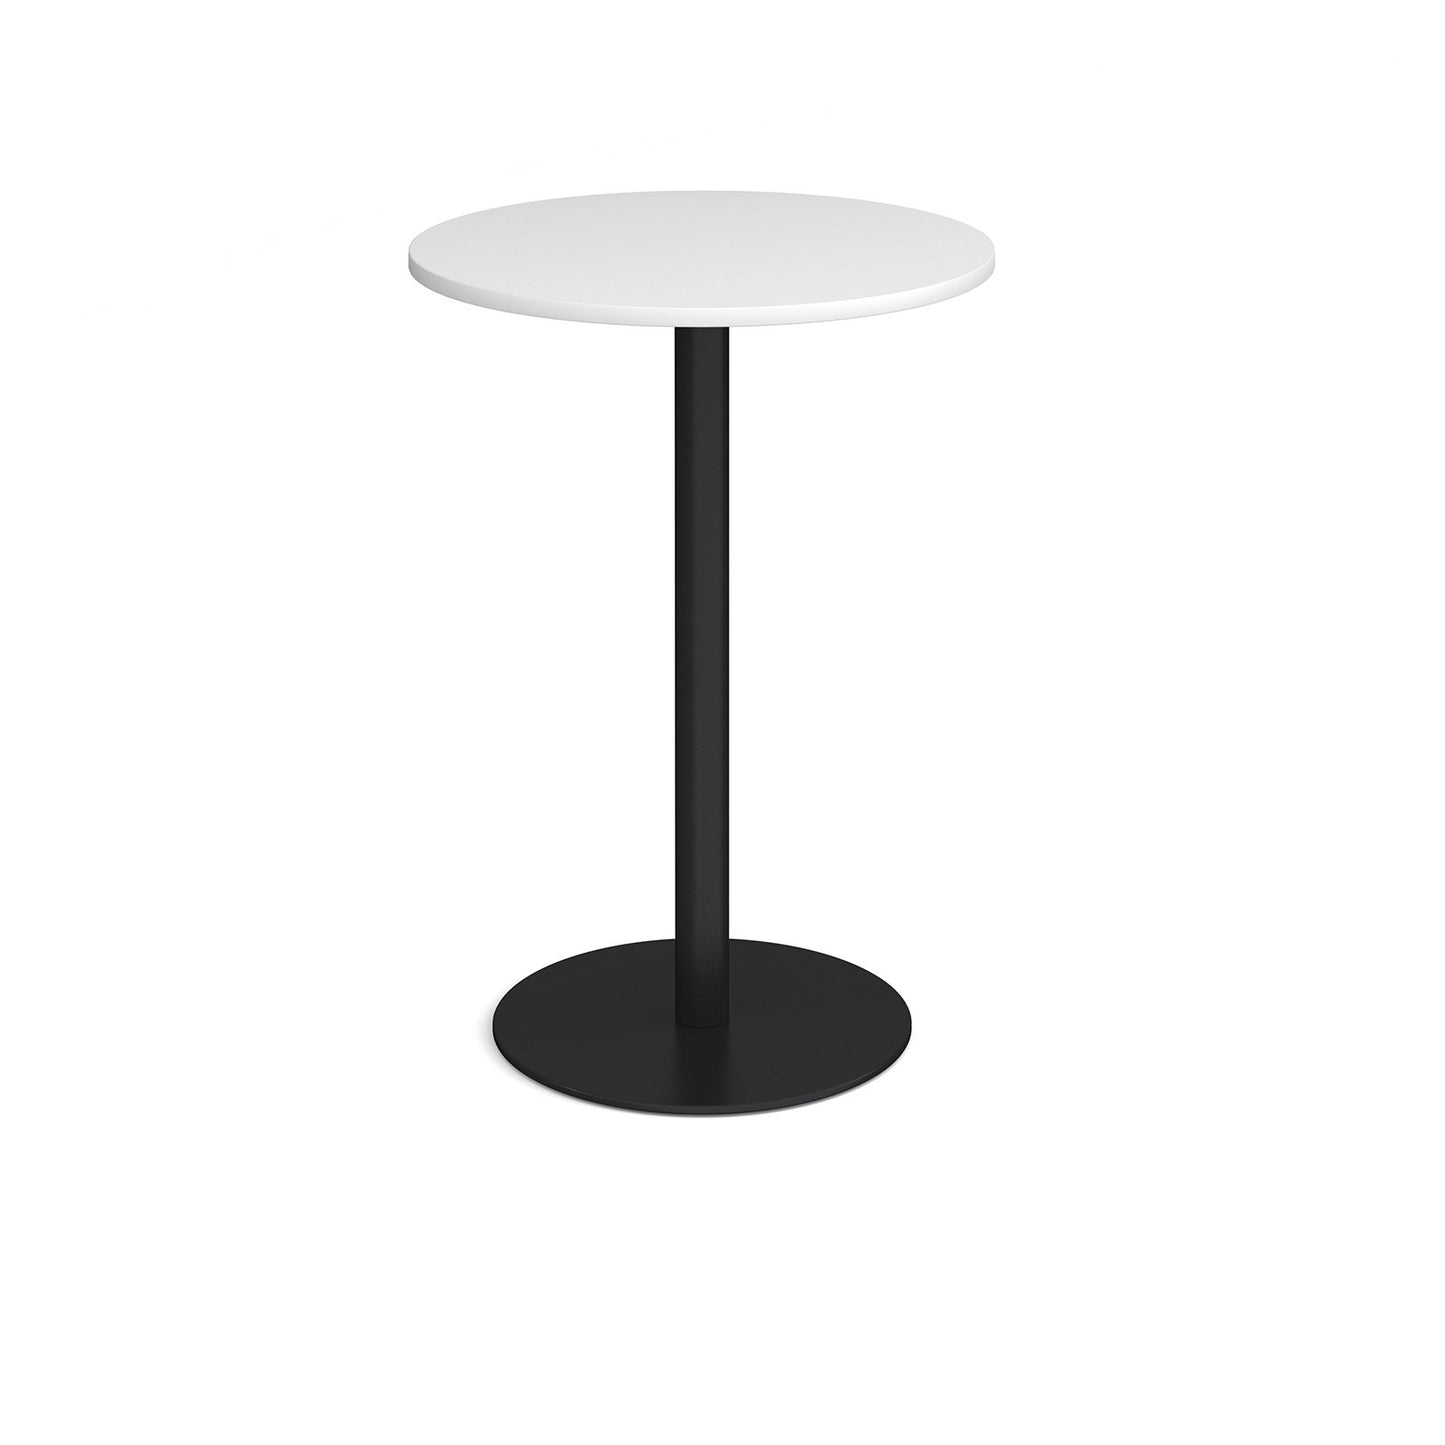 Monza circular poseur table with flat round base